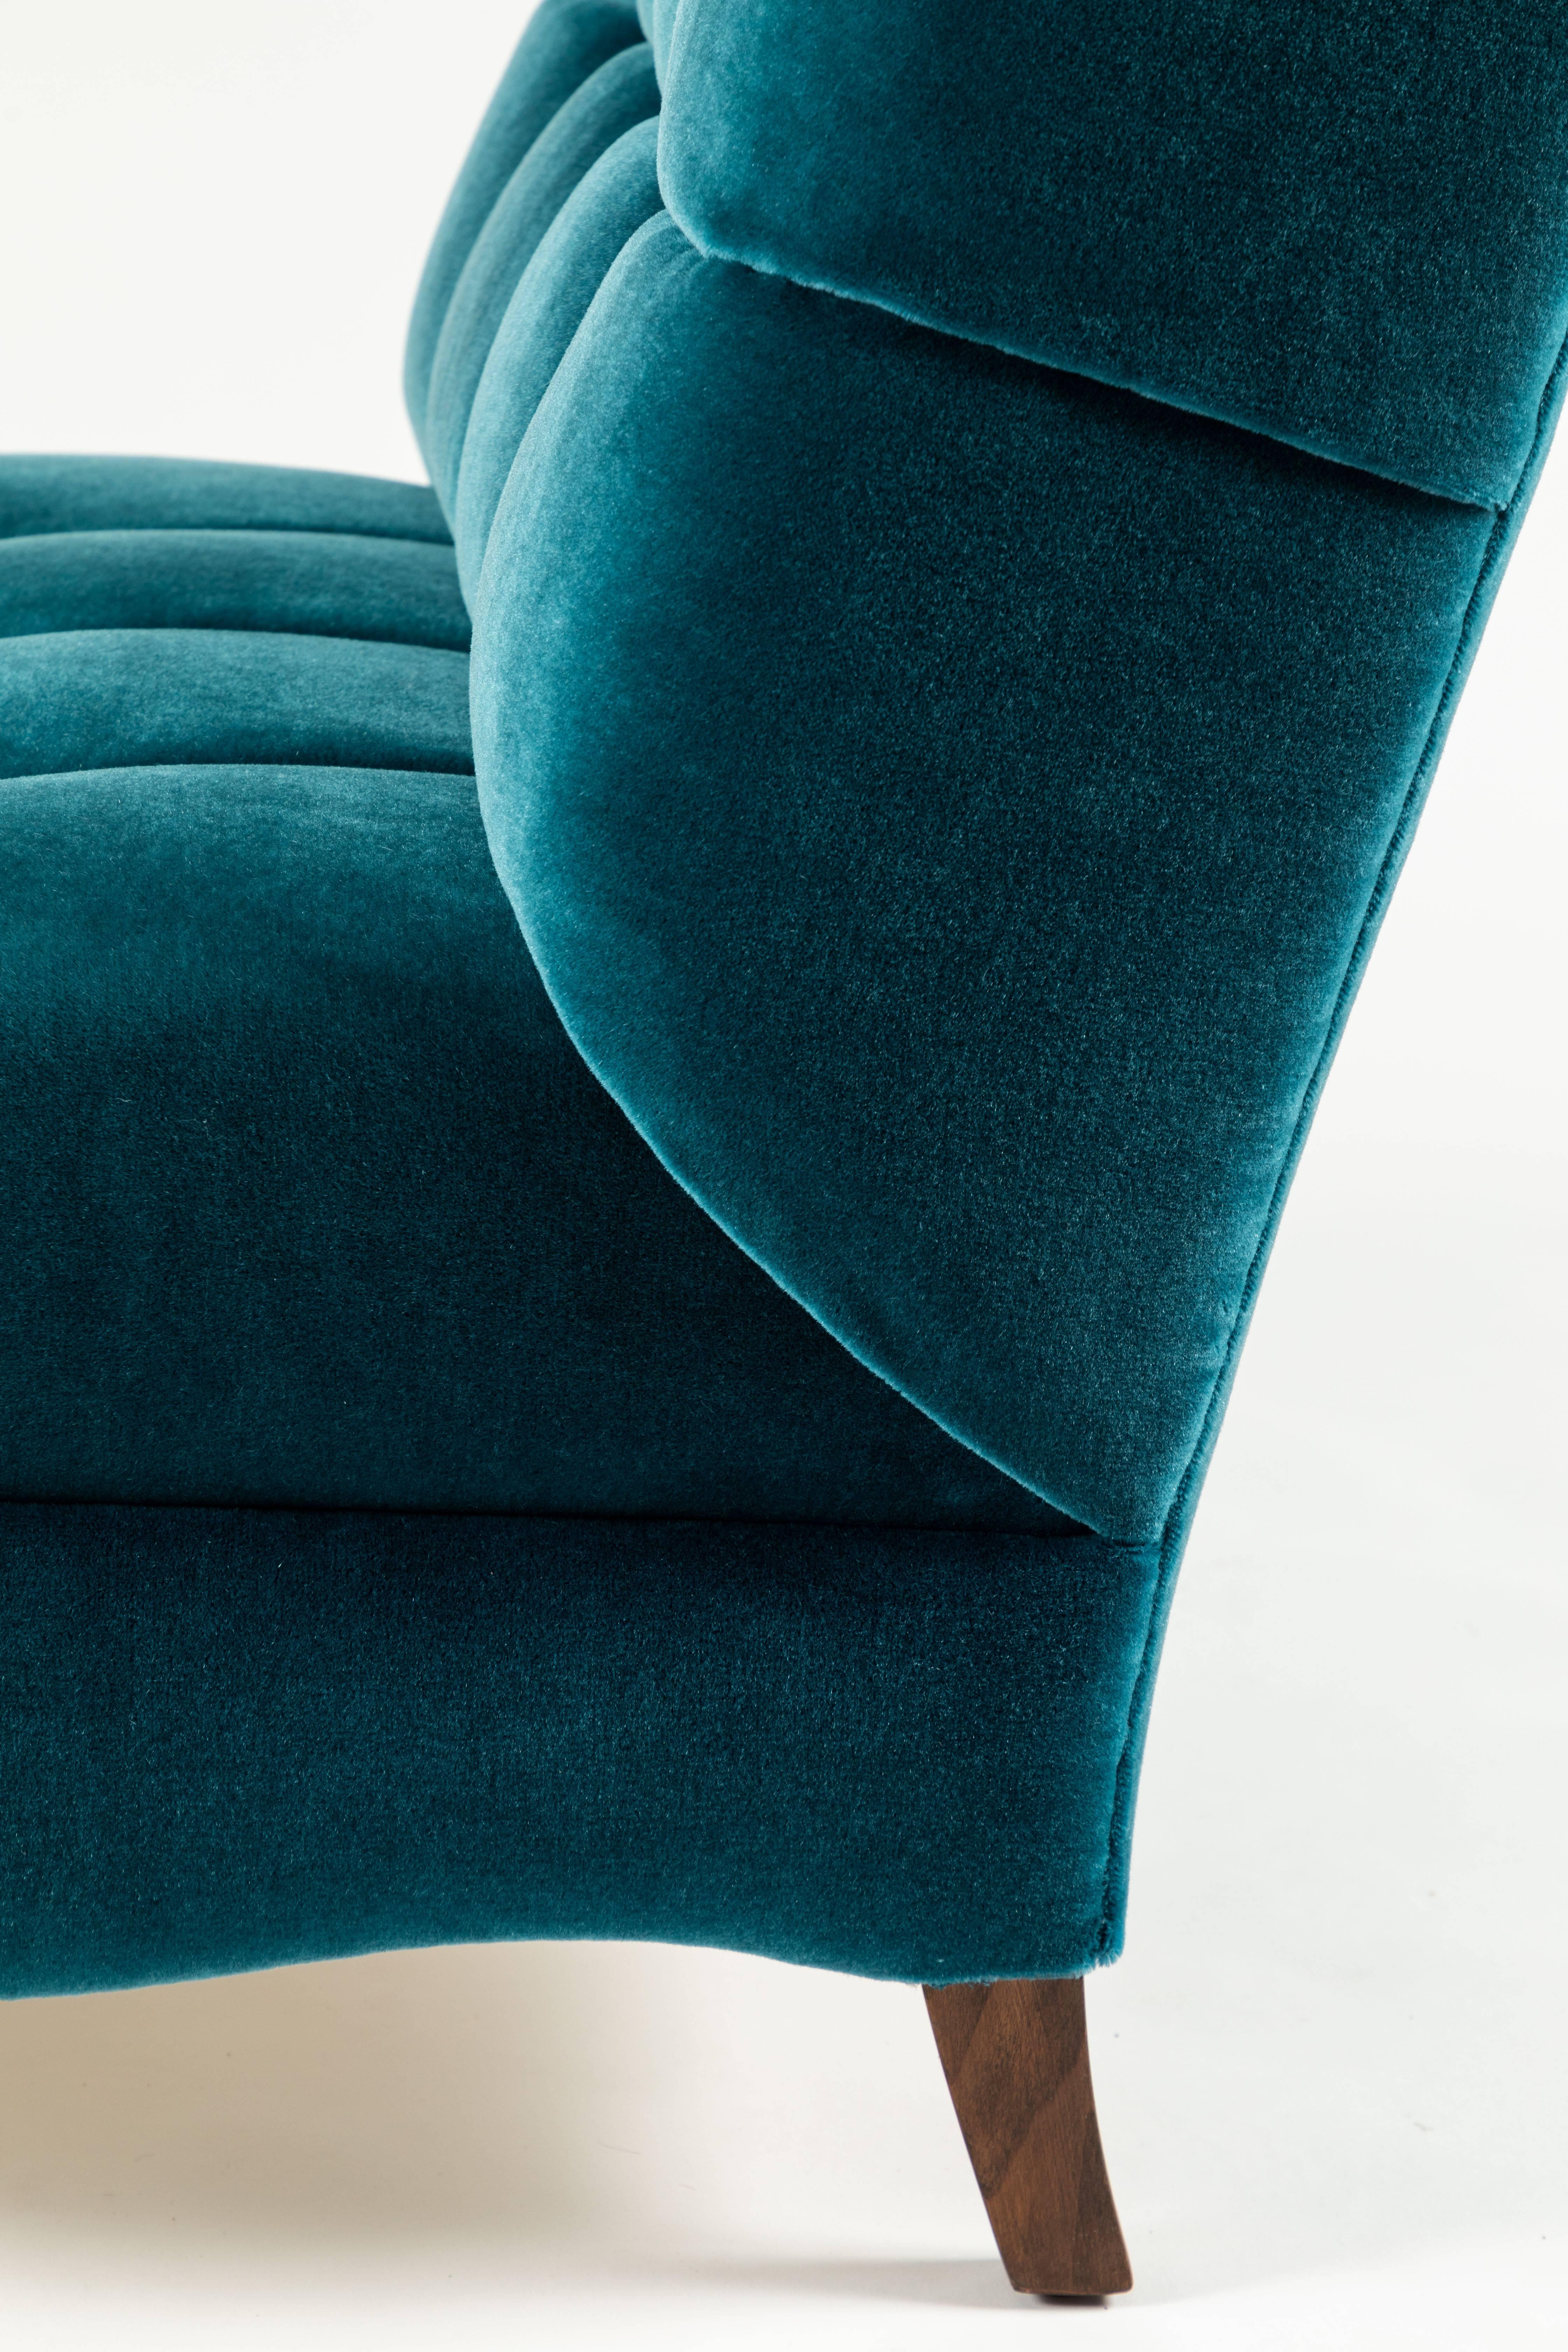 Pair of Biscuit-Tufted Slipper Chairs Covered in Teal Mohair 1